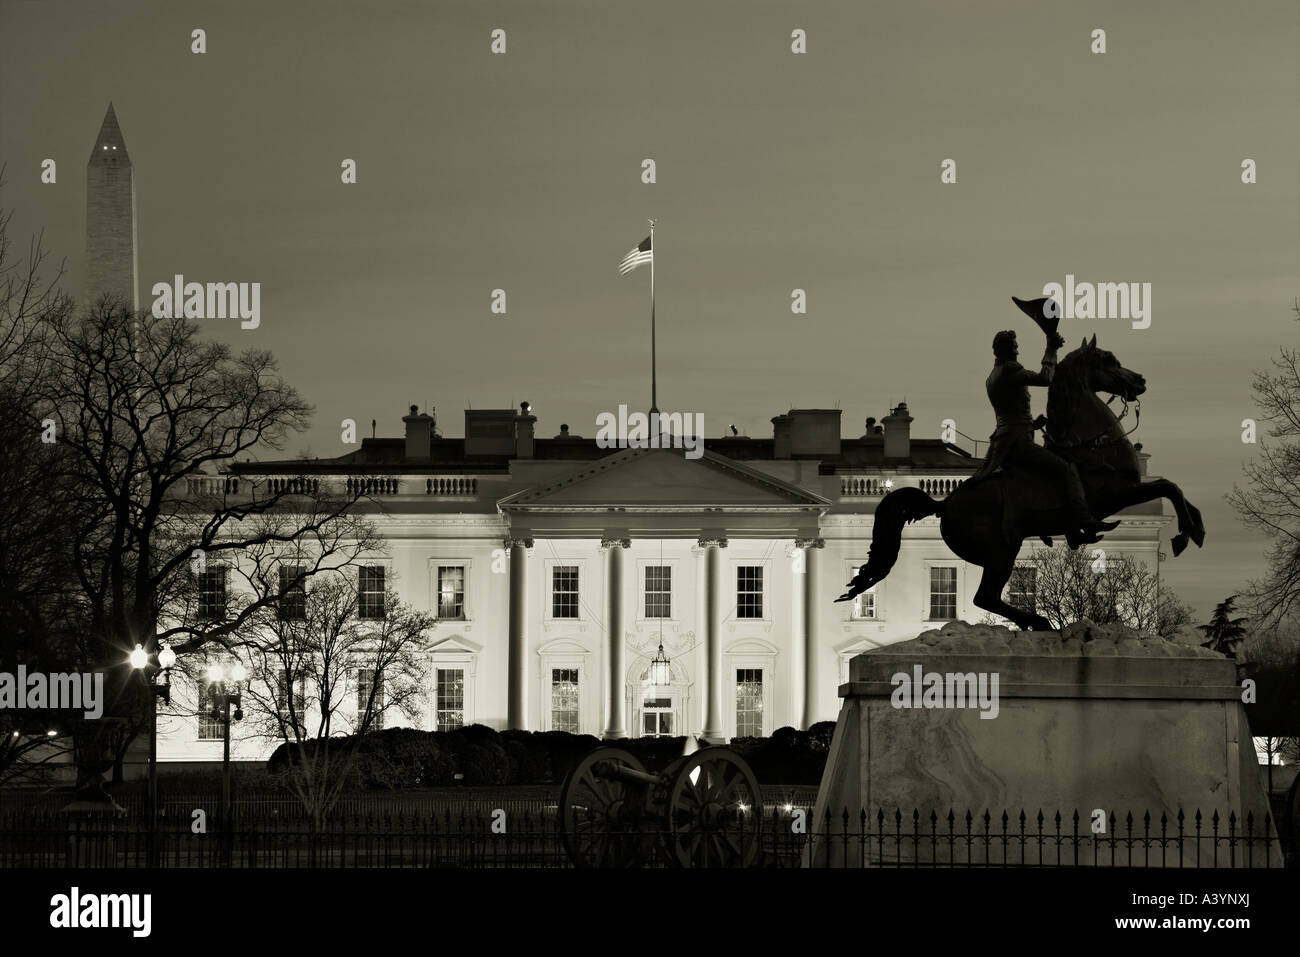 The White House and the equestrian statue of Andrew Jackson in Lafayette Square, Washington DC US at dusk. Black and white. Stock Photo